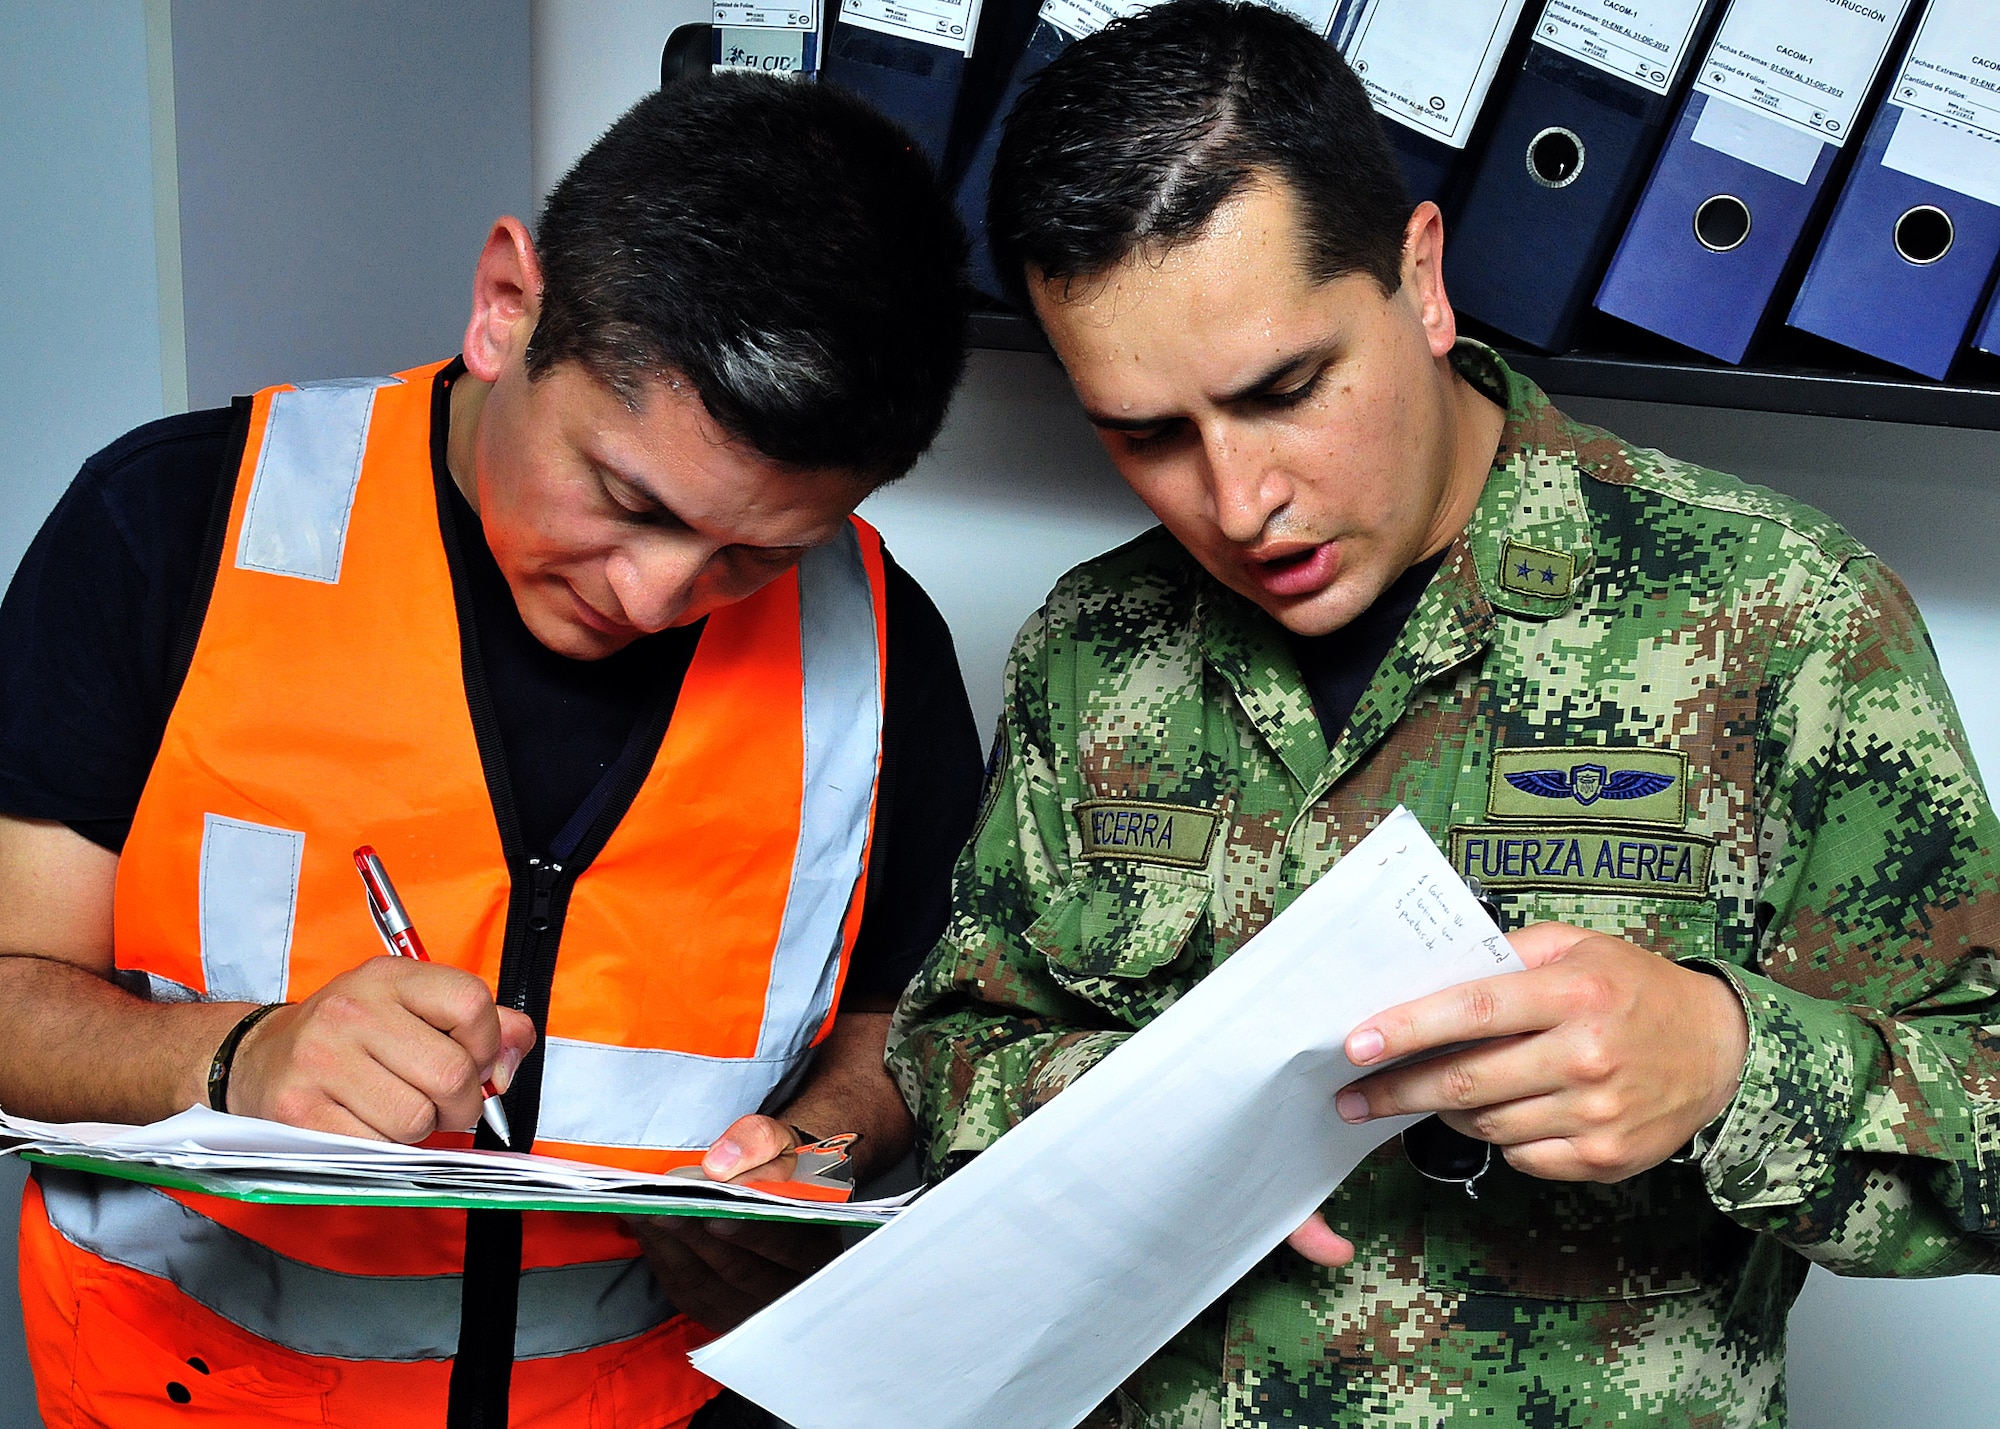 The production superintendent and a maintenance operations center member go over the evening's flight schedule before the MOC briefing for senior leadership June 15, at Comando Aéreo de Combate No. 1 base, Palanquero, Colombia, as part of a month-long Air Mobility Command Building Partner Capacity mission. (U.S. Air Force photo by Tech. Sgt. Lesley Waters)